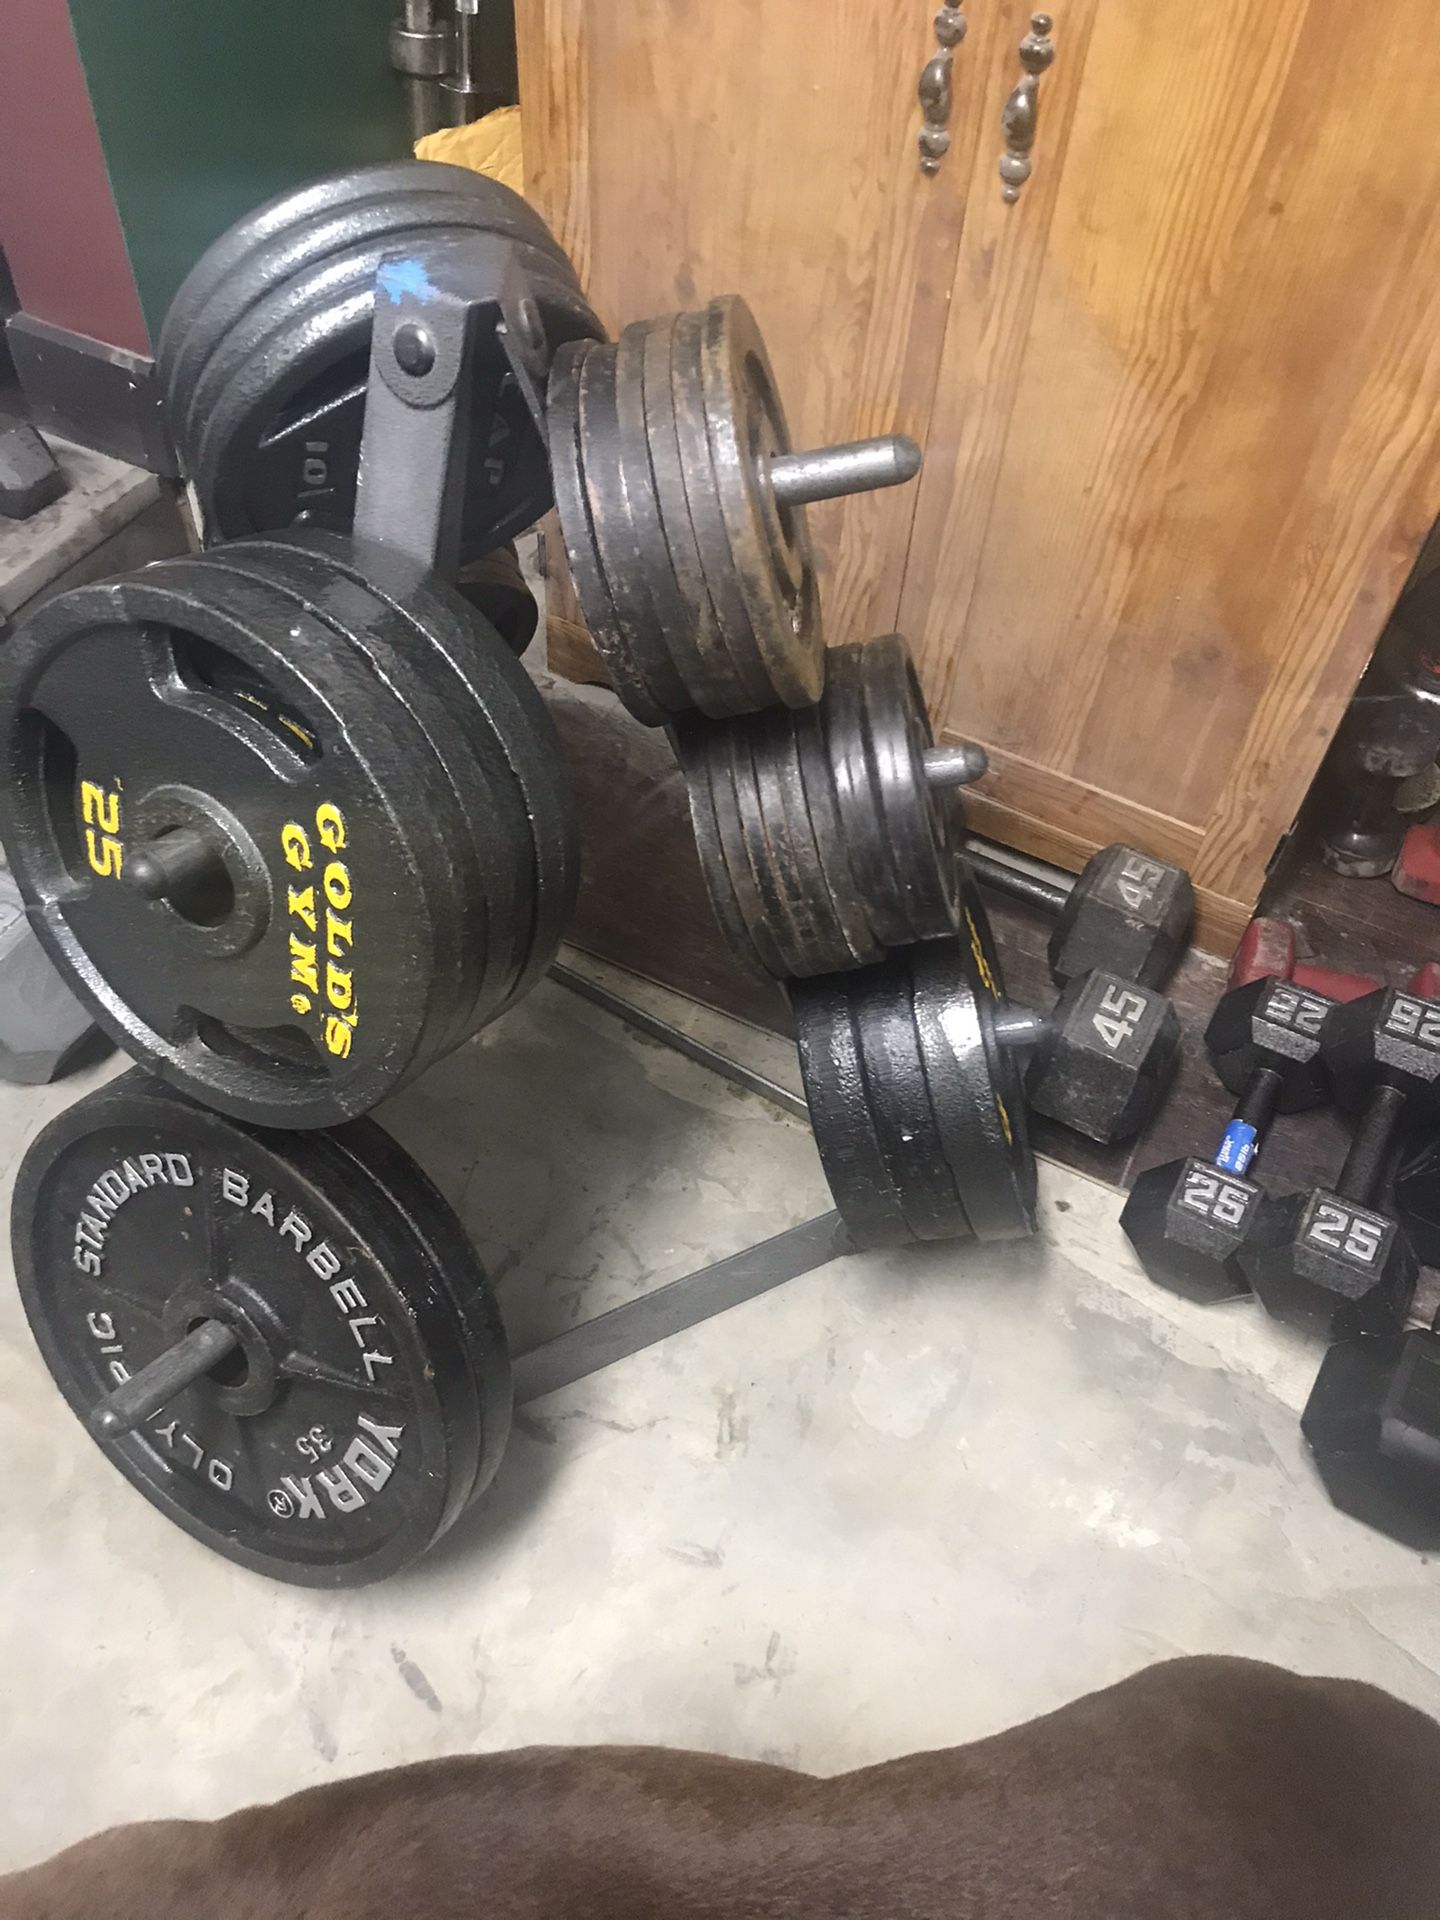 Olympic weights, weight tree, dumbbells 1.50 per pound